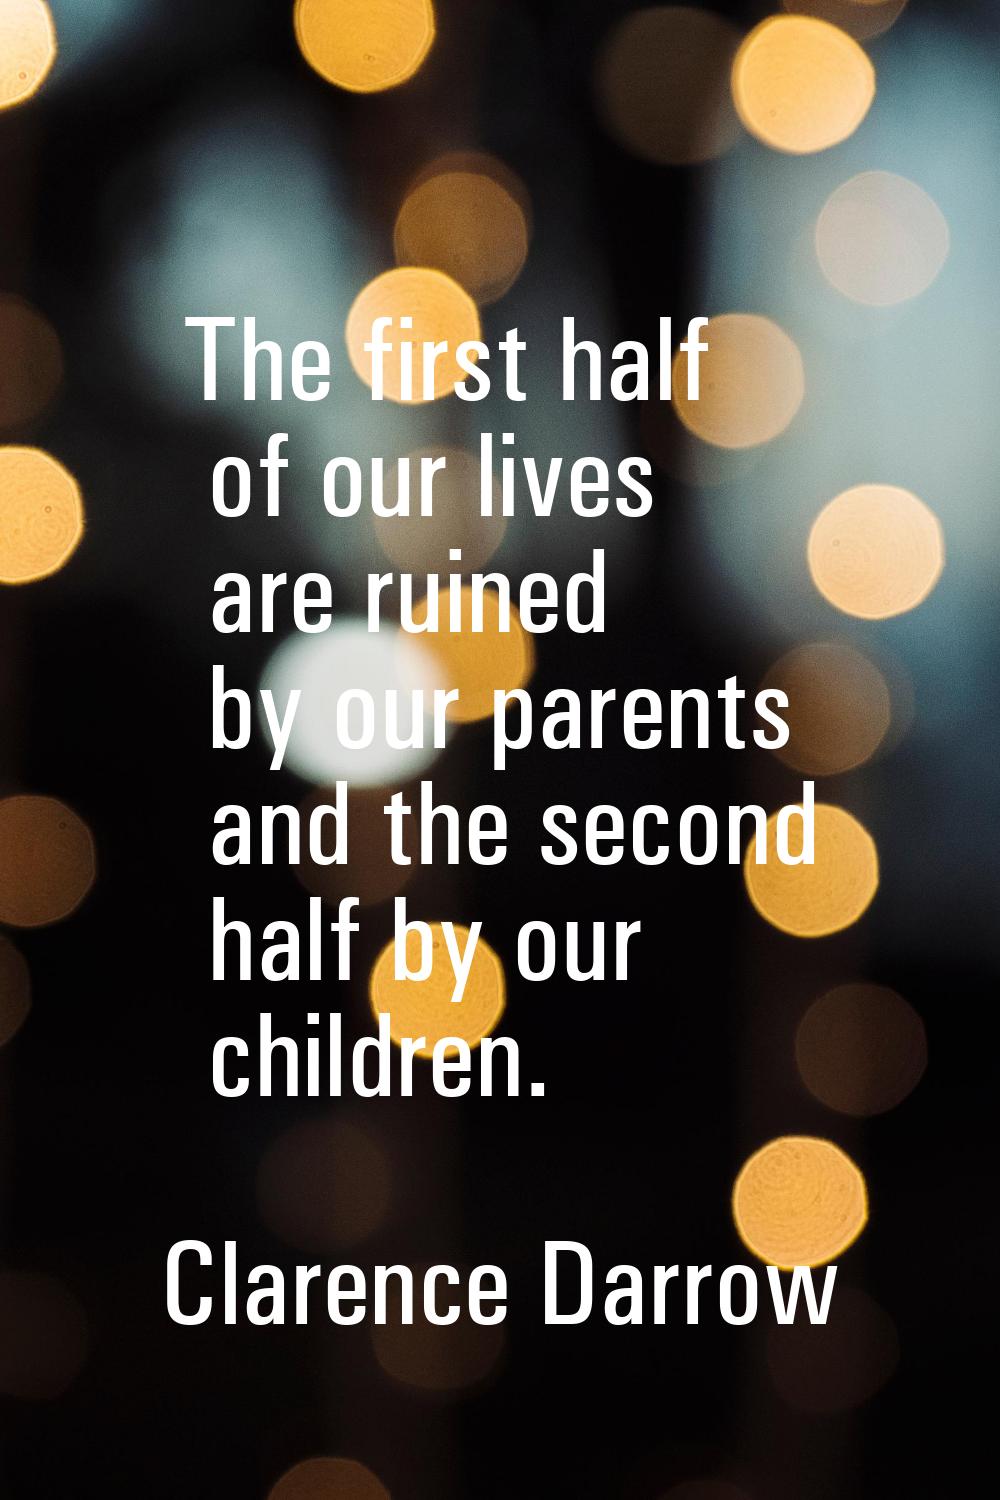 The first half of our lives are ruined by our parents and the second half by our children.